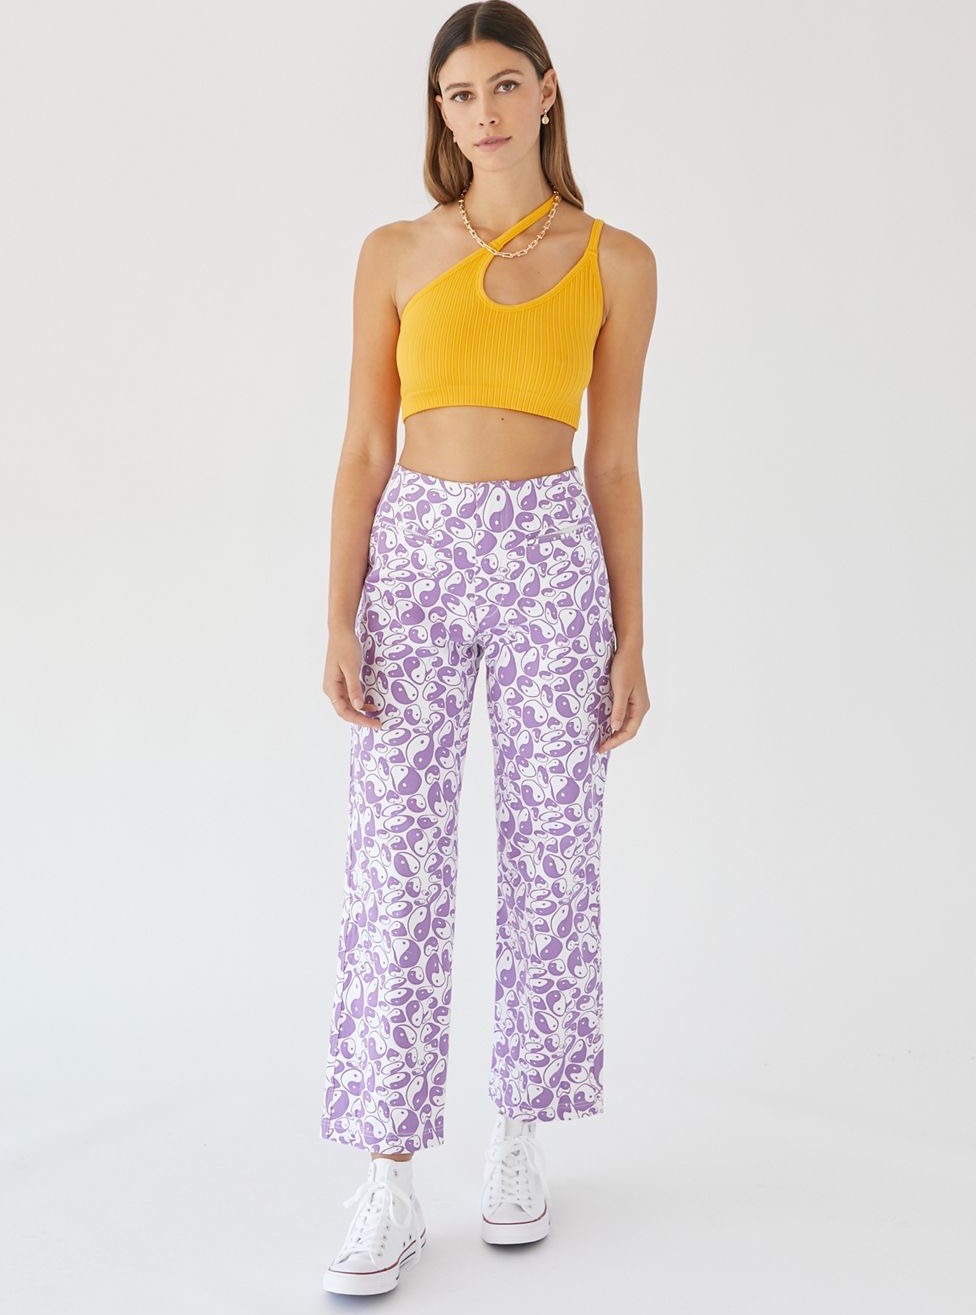 Groovy Patterned Pants #7